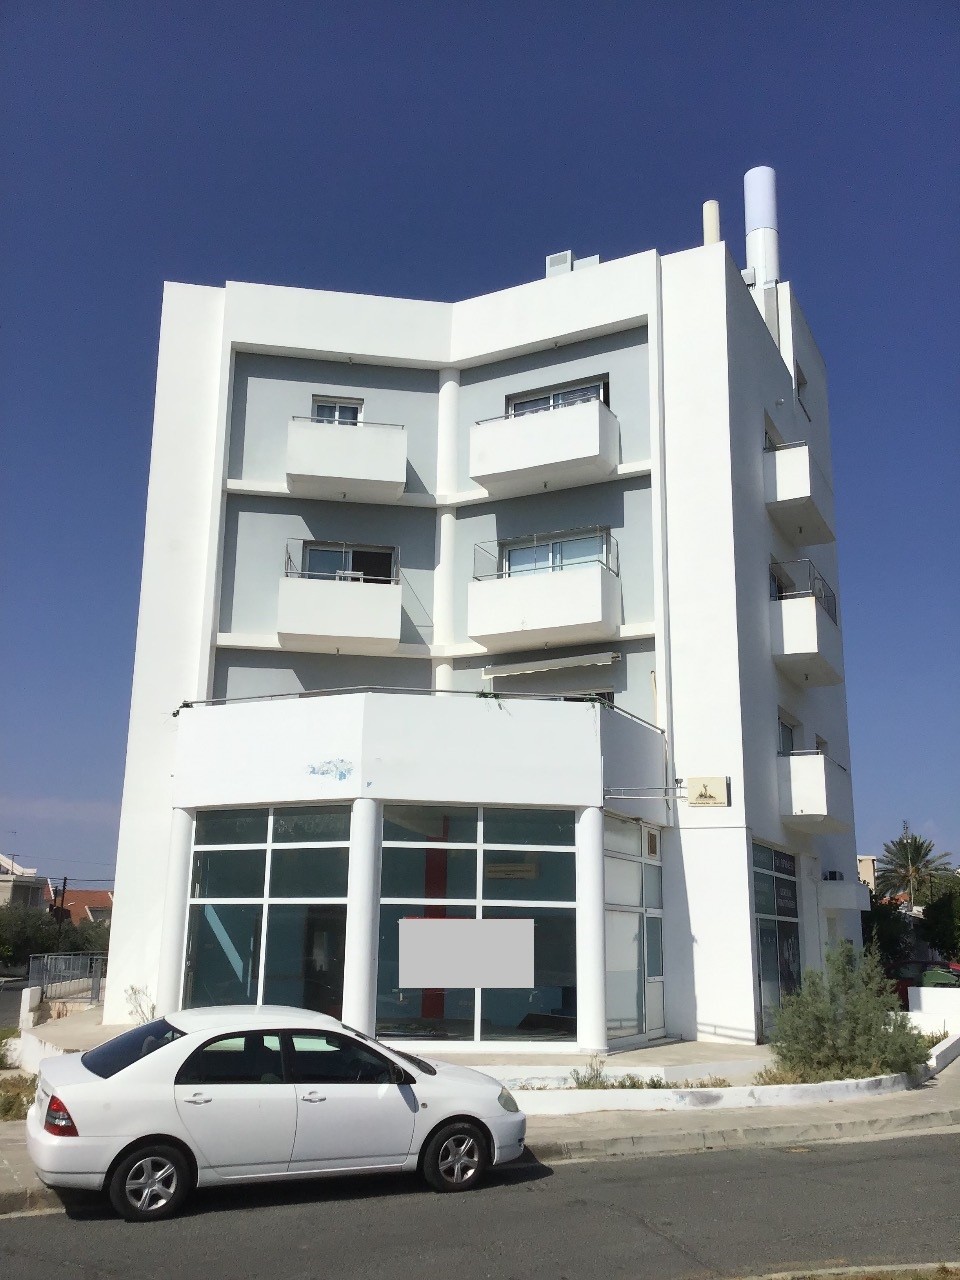 Property for Sale: Investment (Mixed Use) in Agios Dometios, Nicosia  | Key Realtor Cyprus